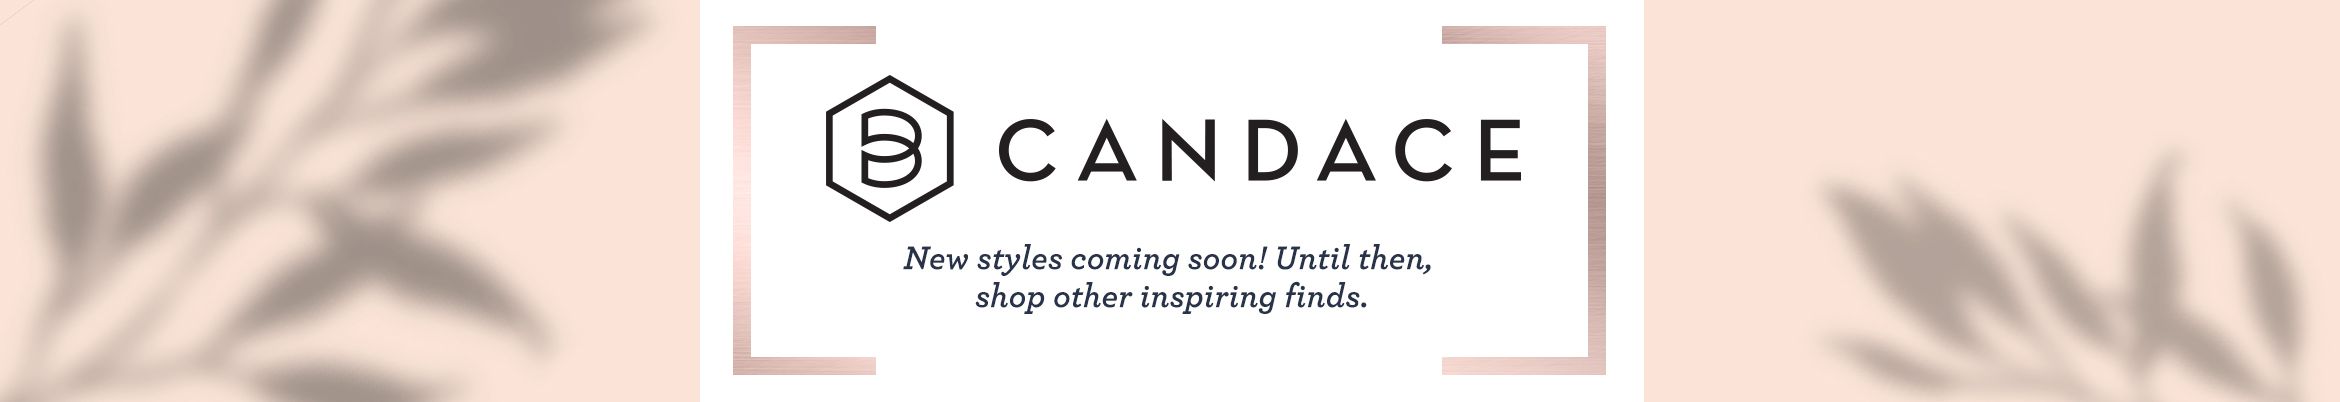 Candace Cameron Bure  New styles coming soon! Until then, shop other inspiring finds.